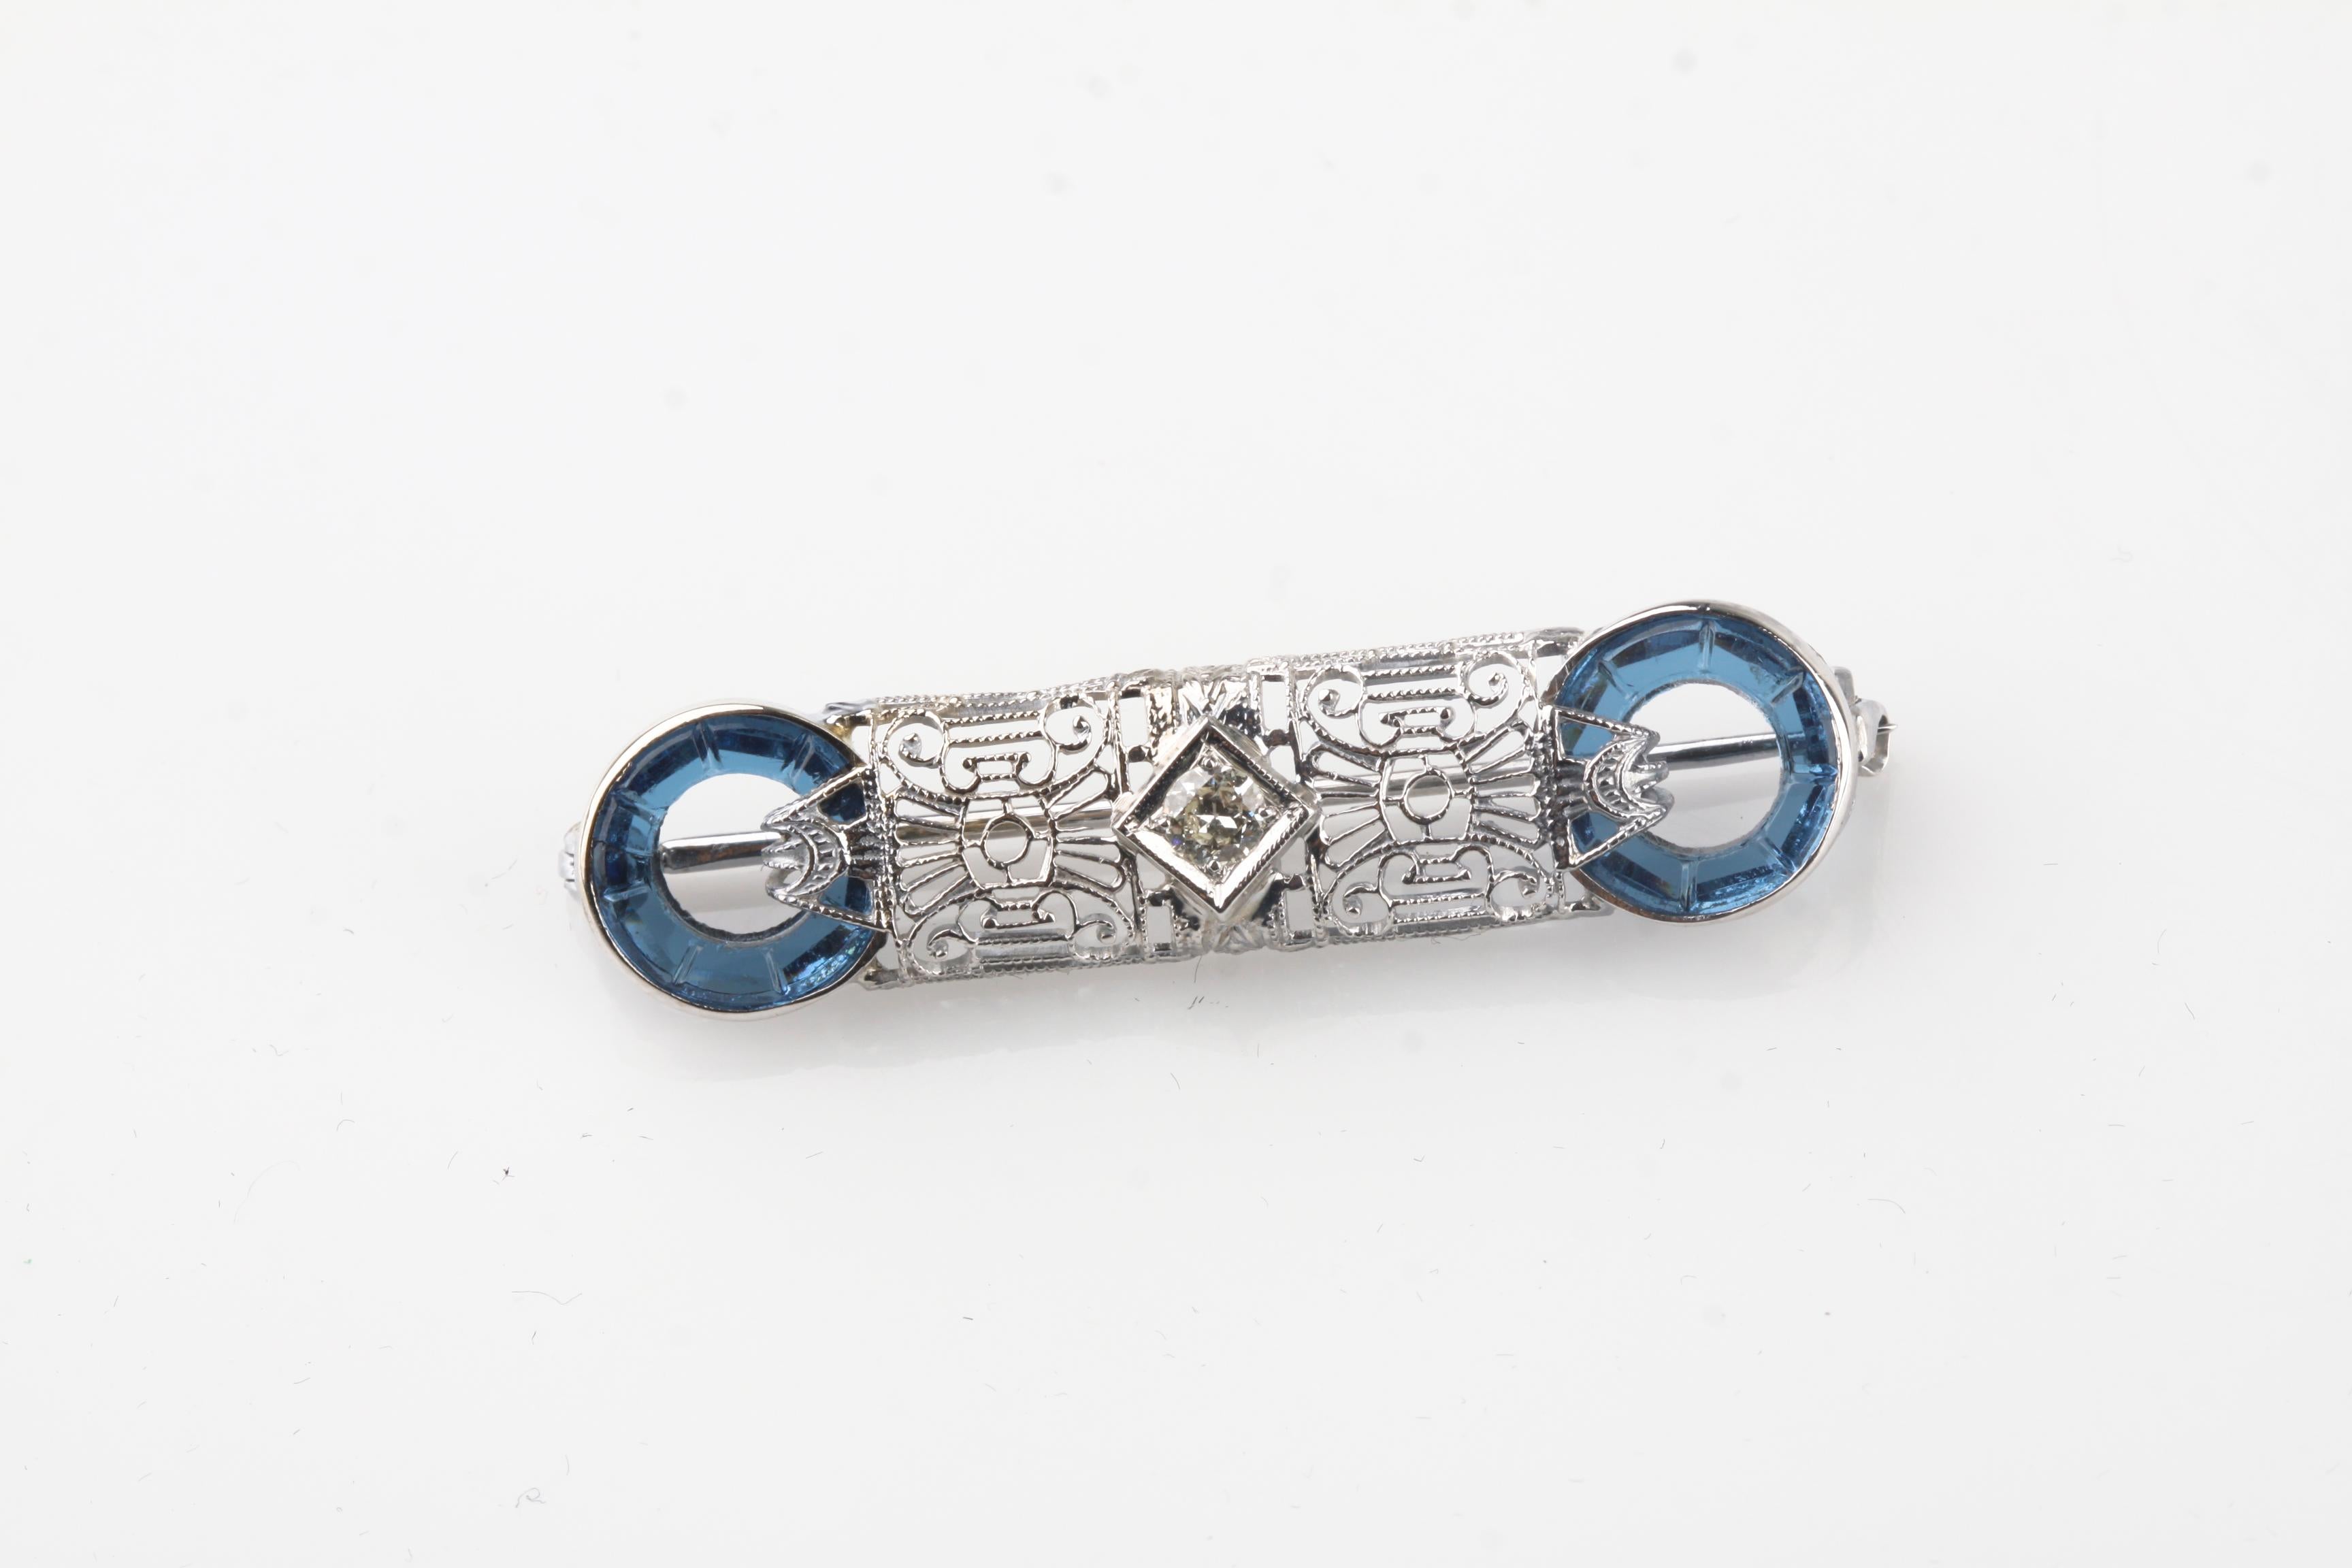 One electronically tested 14KT white gold ladies cast & assembled brooch.
Reminiscent of the jewelry designs from the late Art Deco Period (The Art Moderne) of 1925 to the 1940s.
The Paris Exposition of Decorative Arts and Modern Manufacturers in